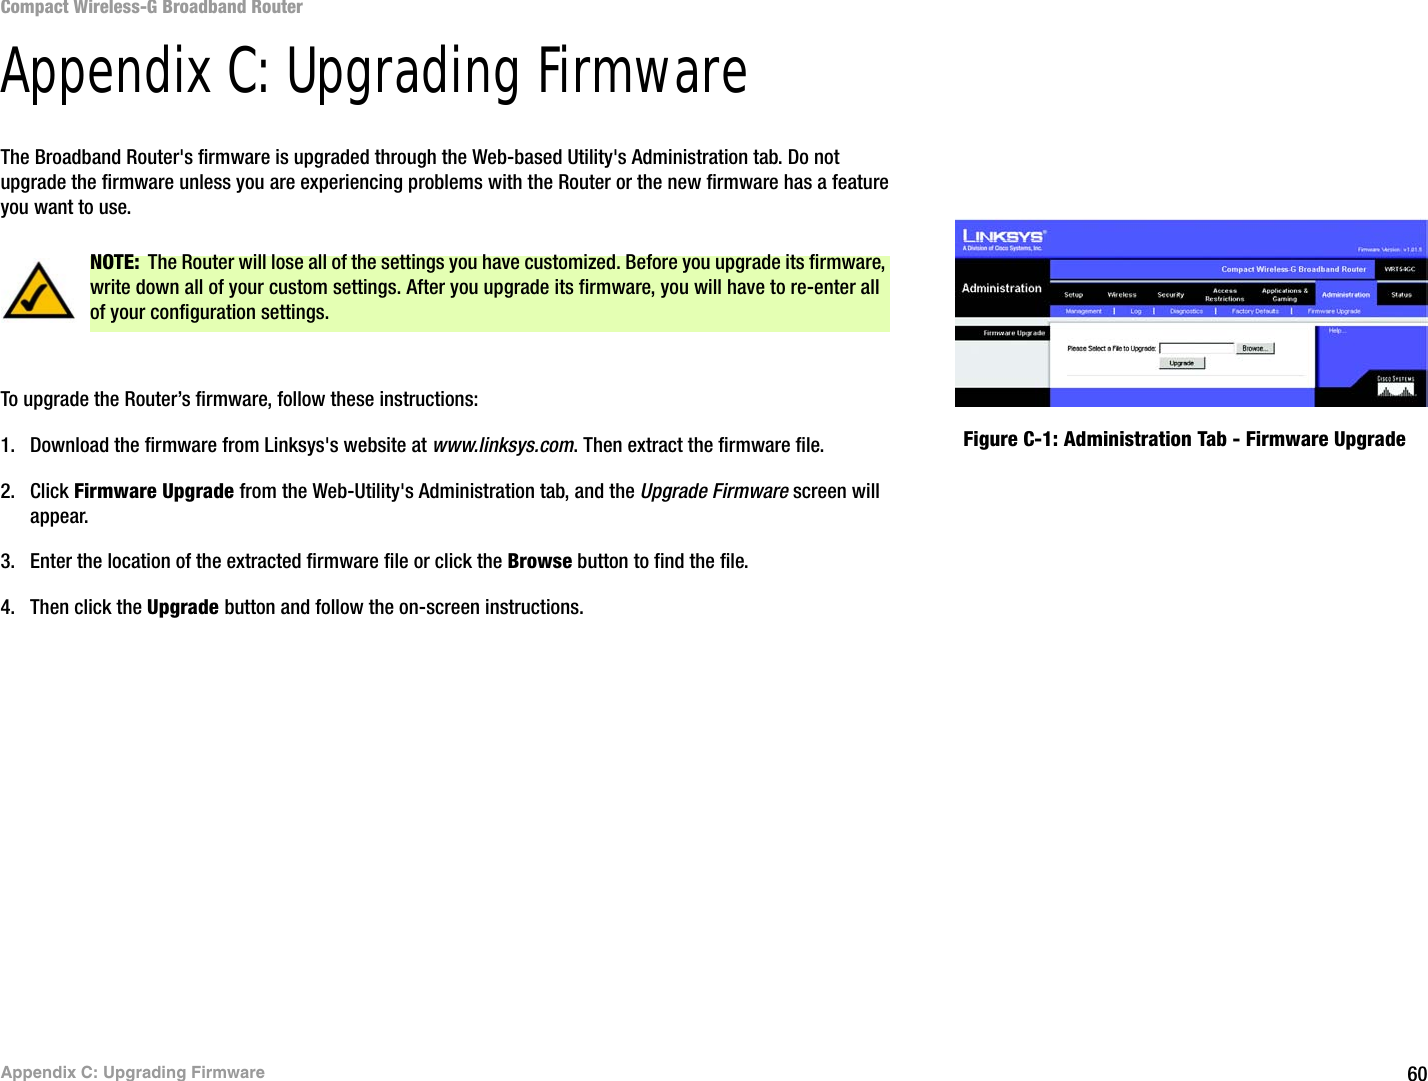 60Appendix C: Upgrading FirmwareCompact Wireless-G Broadband RouterAppendix C: Upgrading FirmwareThe Broadband Router&apos;s firmware is upgraded through the Web-based Utility&apos;s Administration tab. Do not upgrade the firmware unless you are experiencing problems with the Router or the new firmware has a feature you want to use.To upgrade the Router’s firmware, follow these instructions:1. Download the firmware from Linksys&apos;s website at www.linksys.com. Then extract the firmware file.2. Click Firmware Upgrade from the Web-Utility&apos;s Administration tab, and the Upgrade Firmware screen will appear.3. Enter the location of the extracted firmware file or click the Browse button to find the file.4. Then click the Upgrade button and follow the on-screen instructions.Figure C-1: Administration Tab - Firmware UpgradeNOTE: The Router will lose all of the settings you have customized. Before you upgrade its firmware, write down all of your custom settings. After you upgrade its firmware, you will have to re-enter all of your configuration settings.